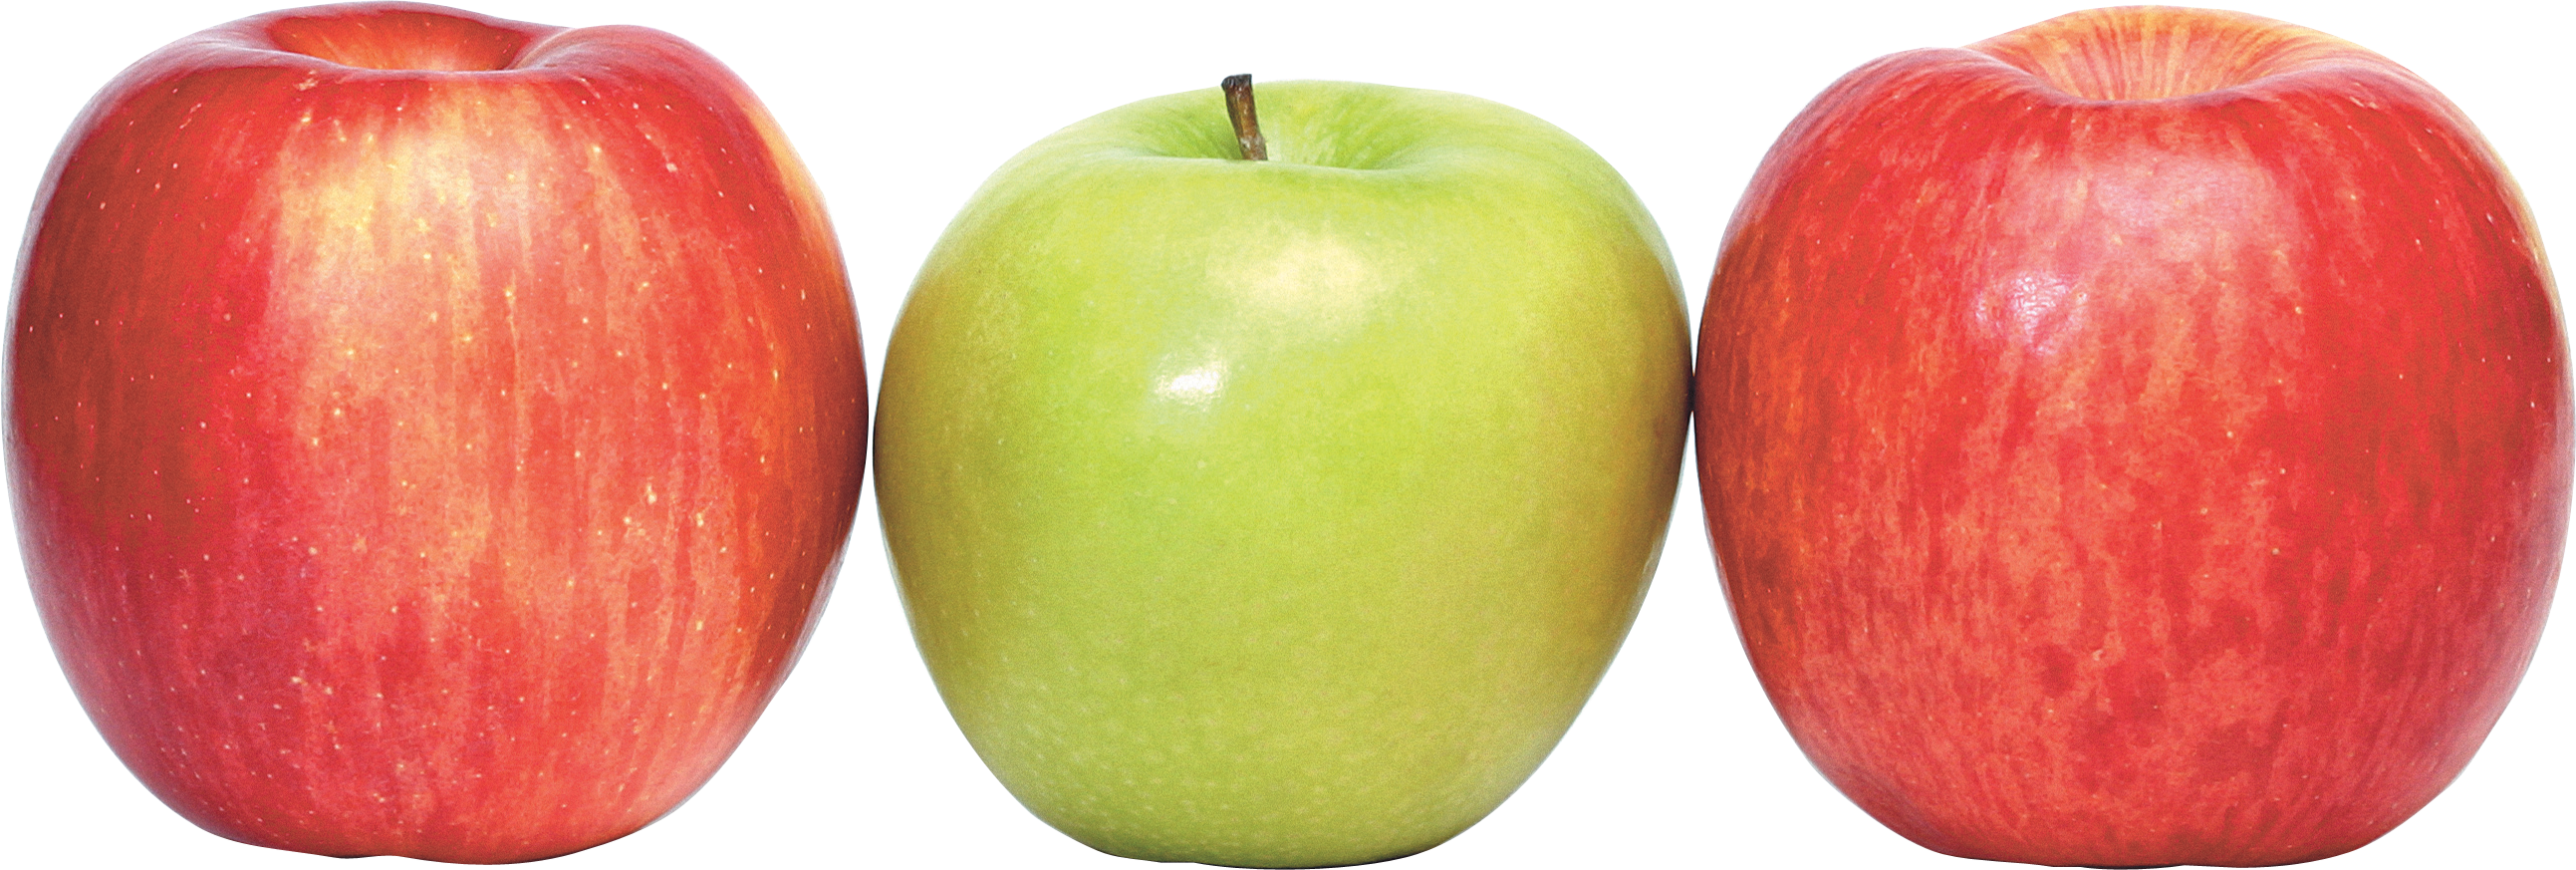 Apple's PNG Image